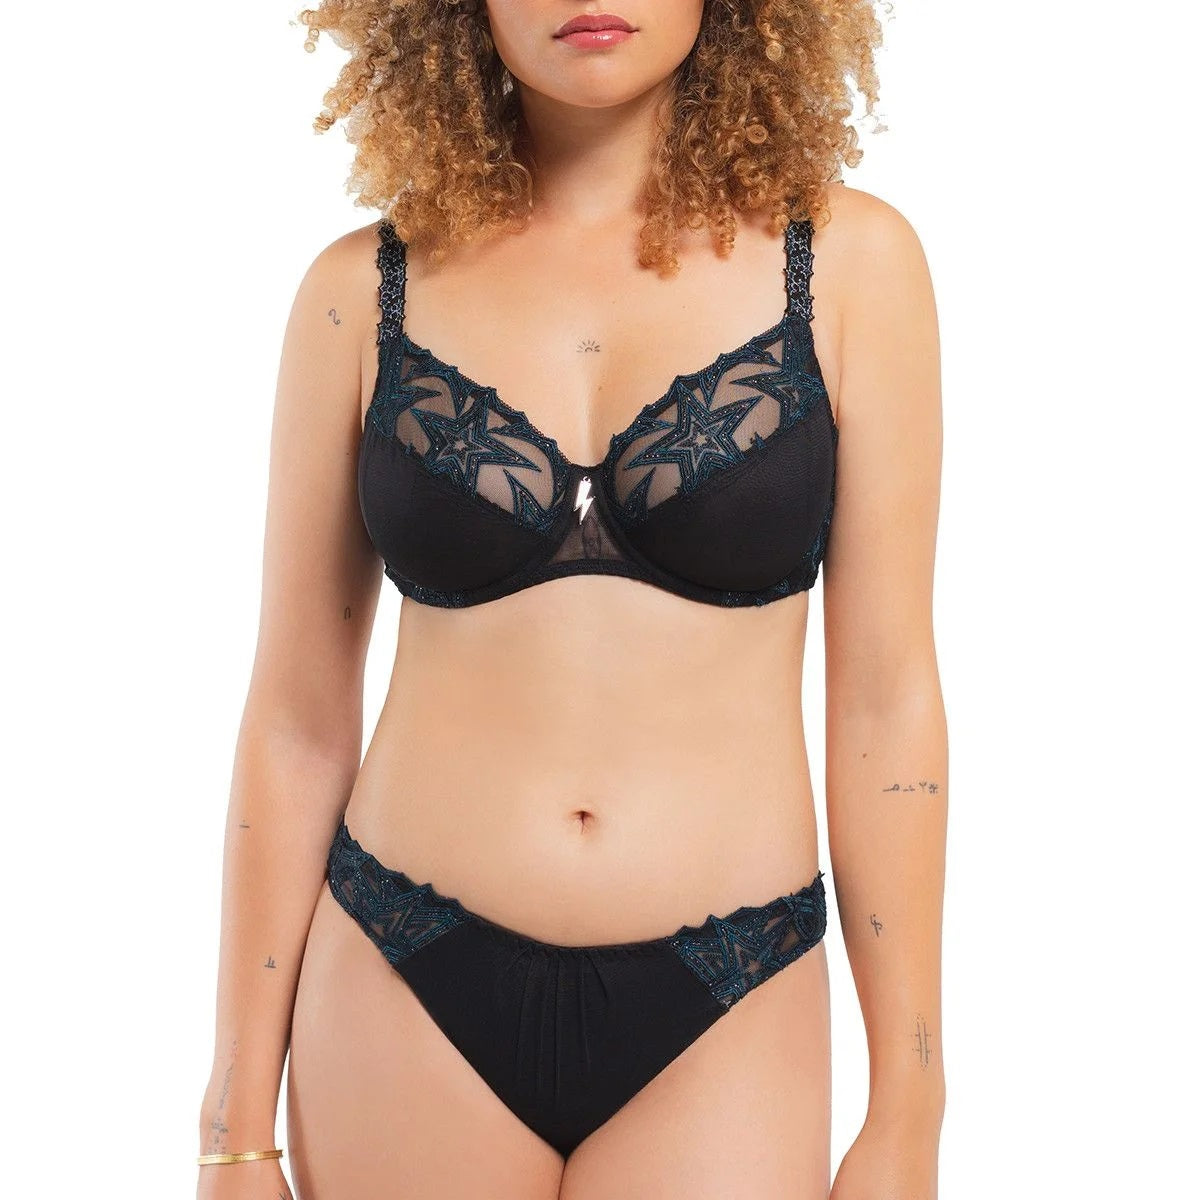 The Louisa Bracq full cup bra from the Superstar line is detailed with a star embroidery pattern for a chic and sultry look. 